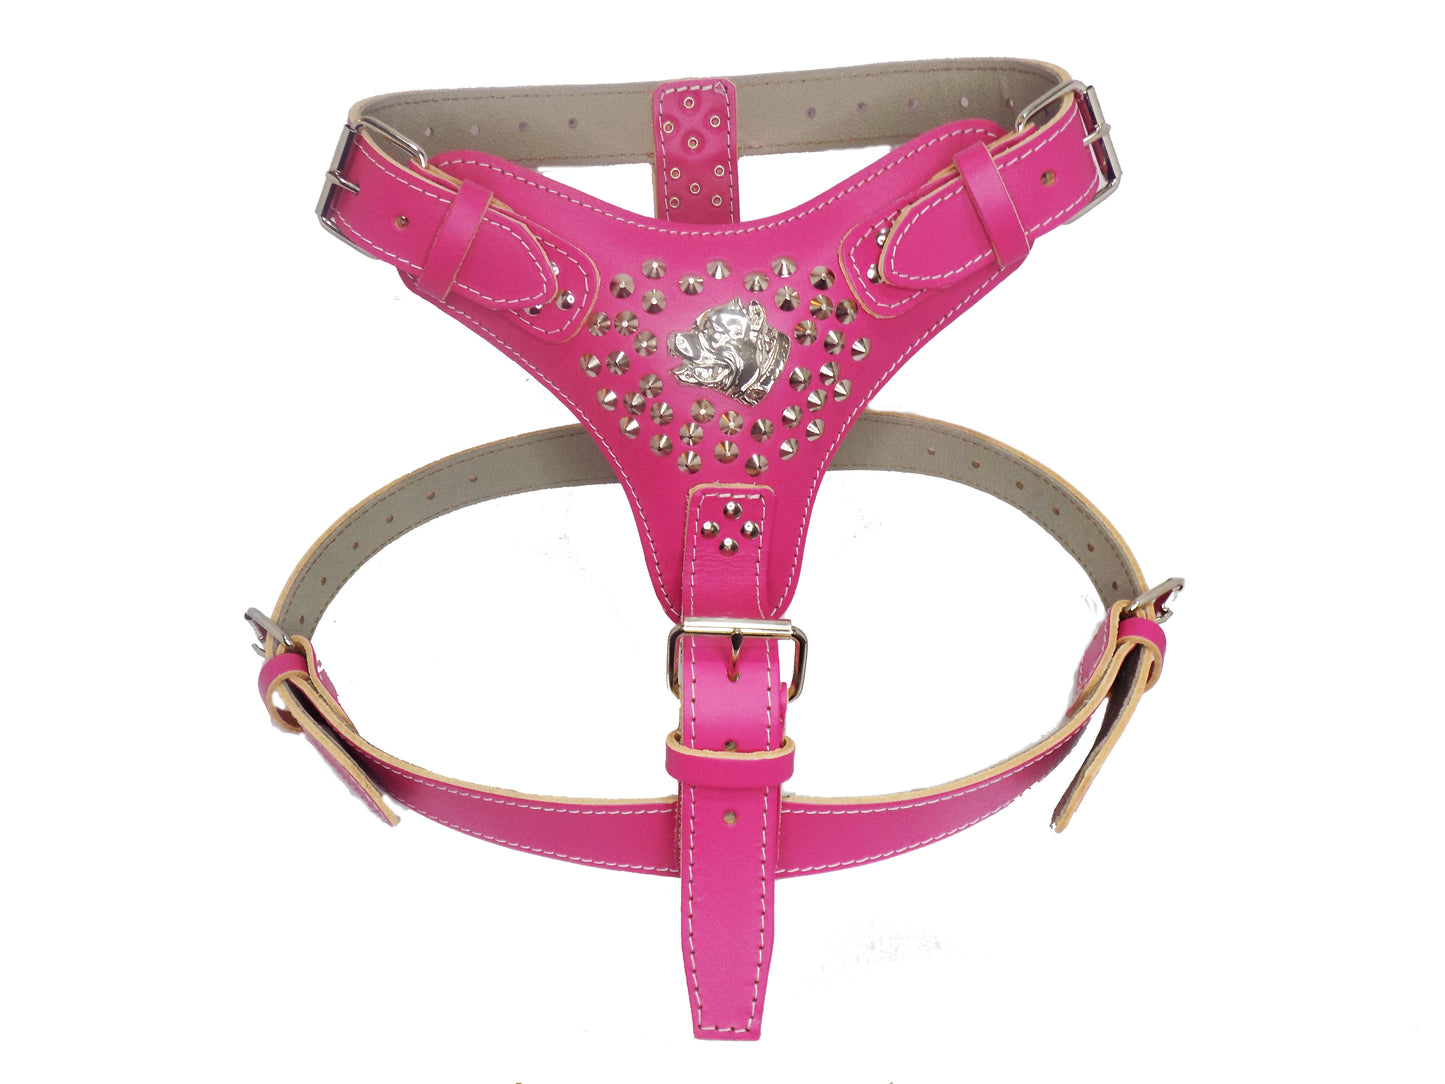 Extra Large Heavy Duty Leather Dog Harness with Silver American Bully and Studded Design